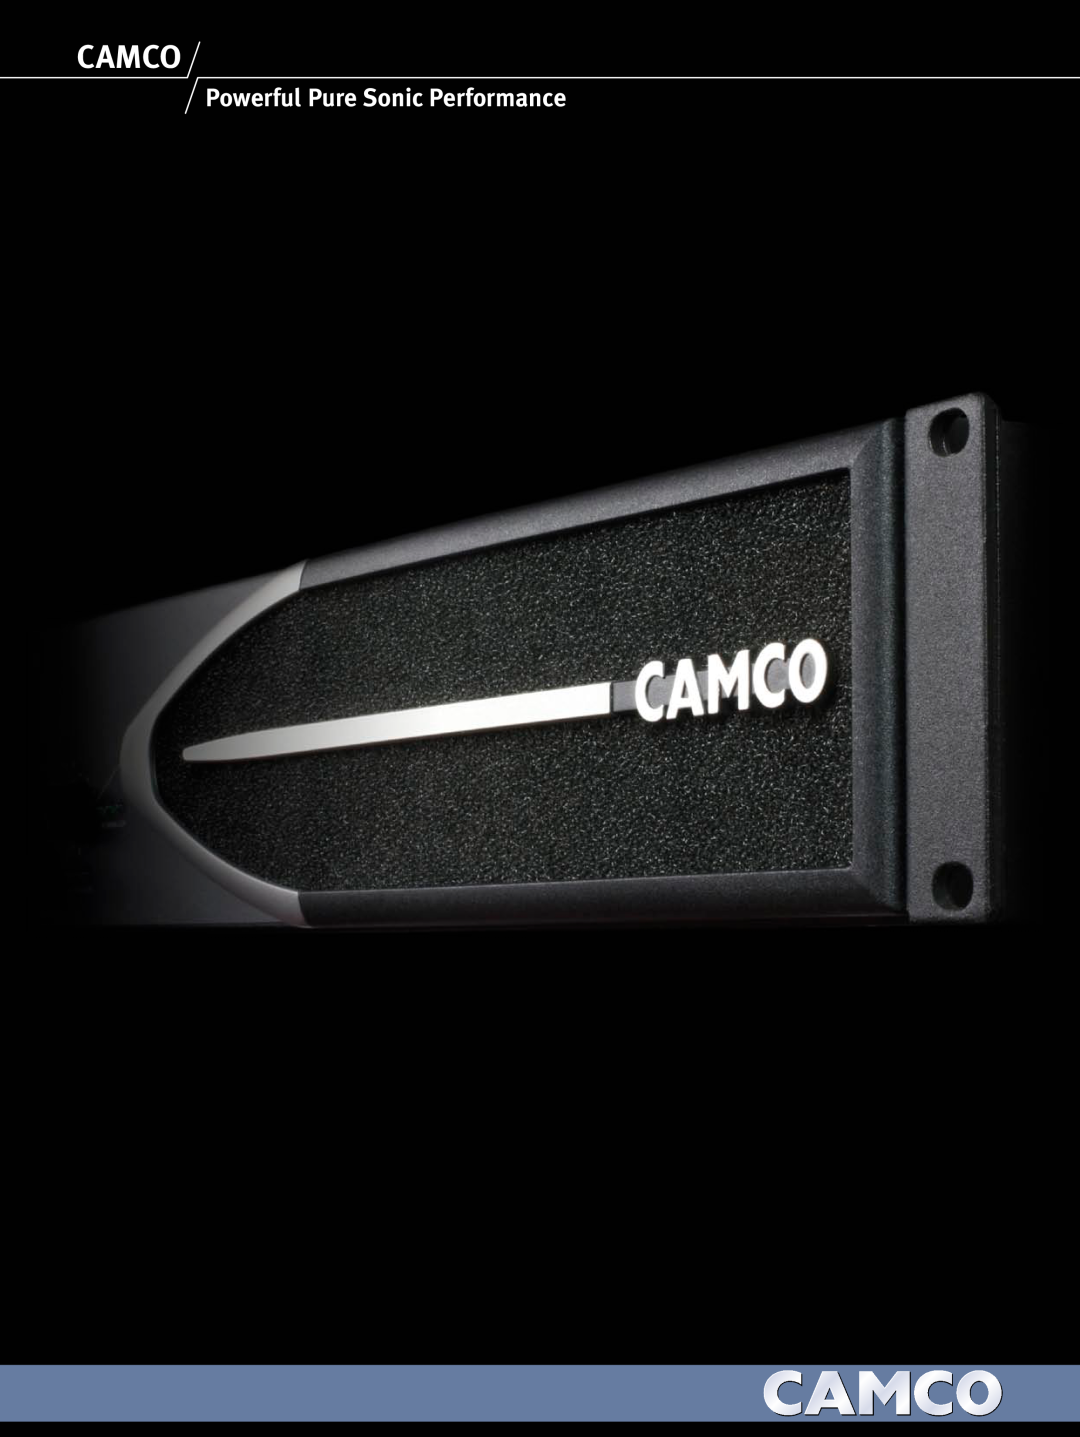 Camco Amplifier manual Camco, Powerful Pure Sonic Performance 